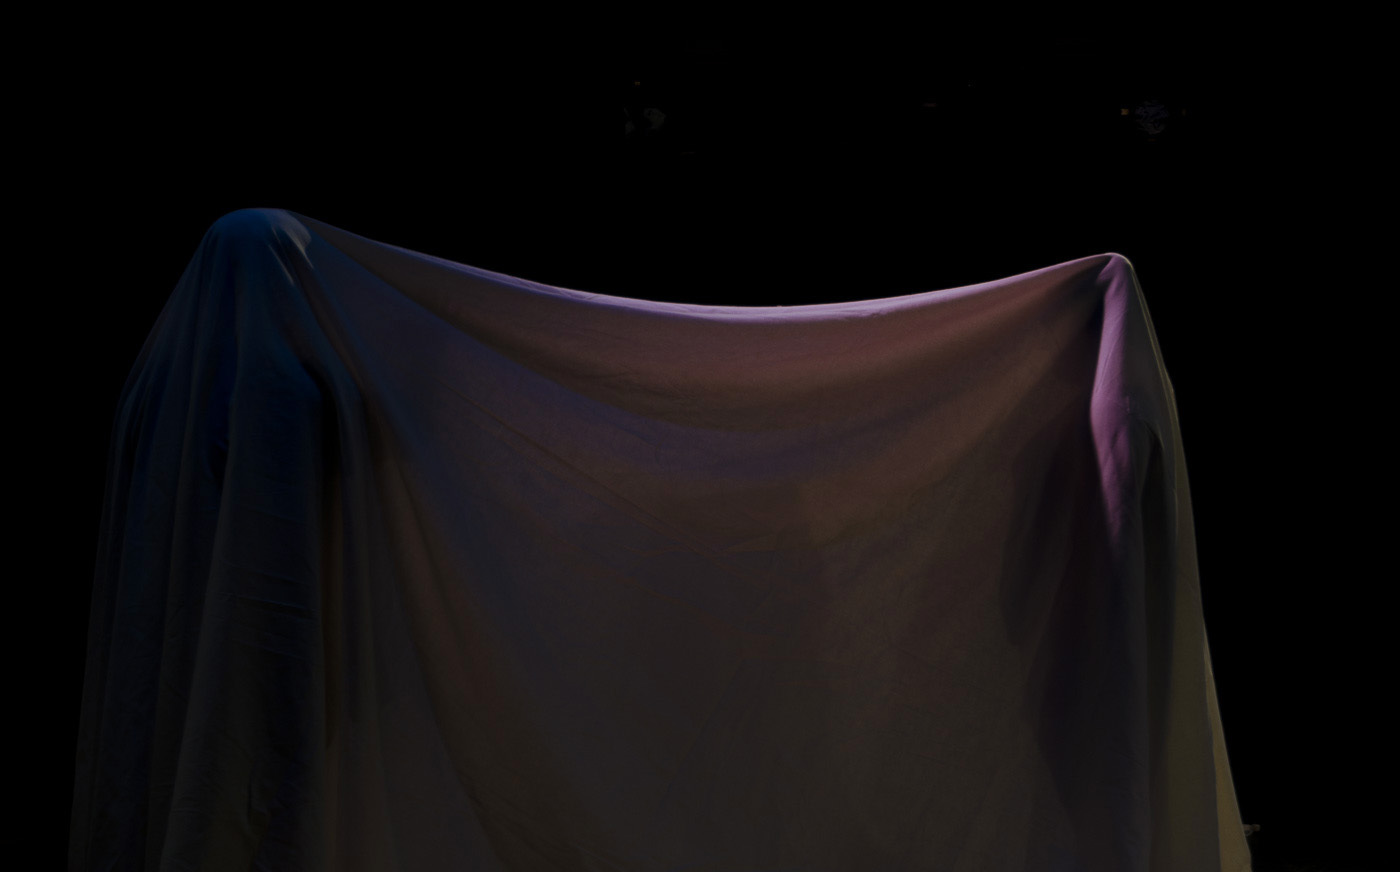 A long sheet of fabric that looks to be held up by two tall long objects. The fabric is lit with blue and pink lights.